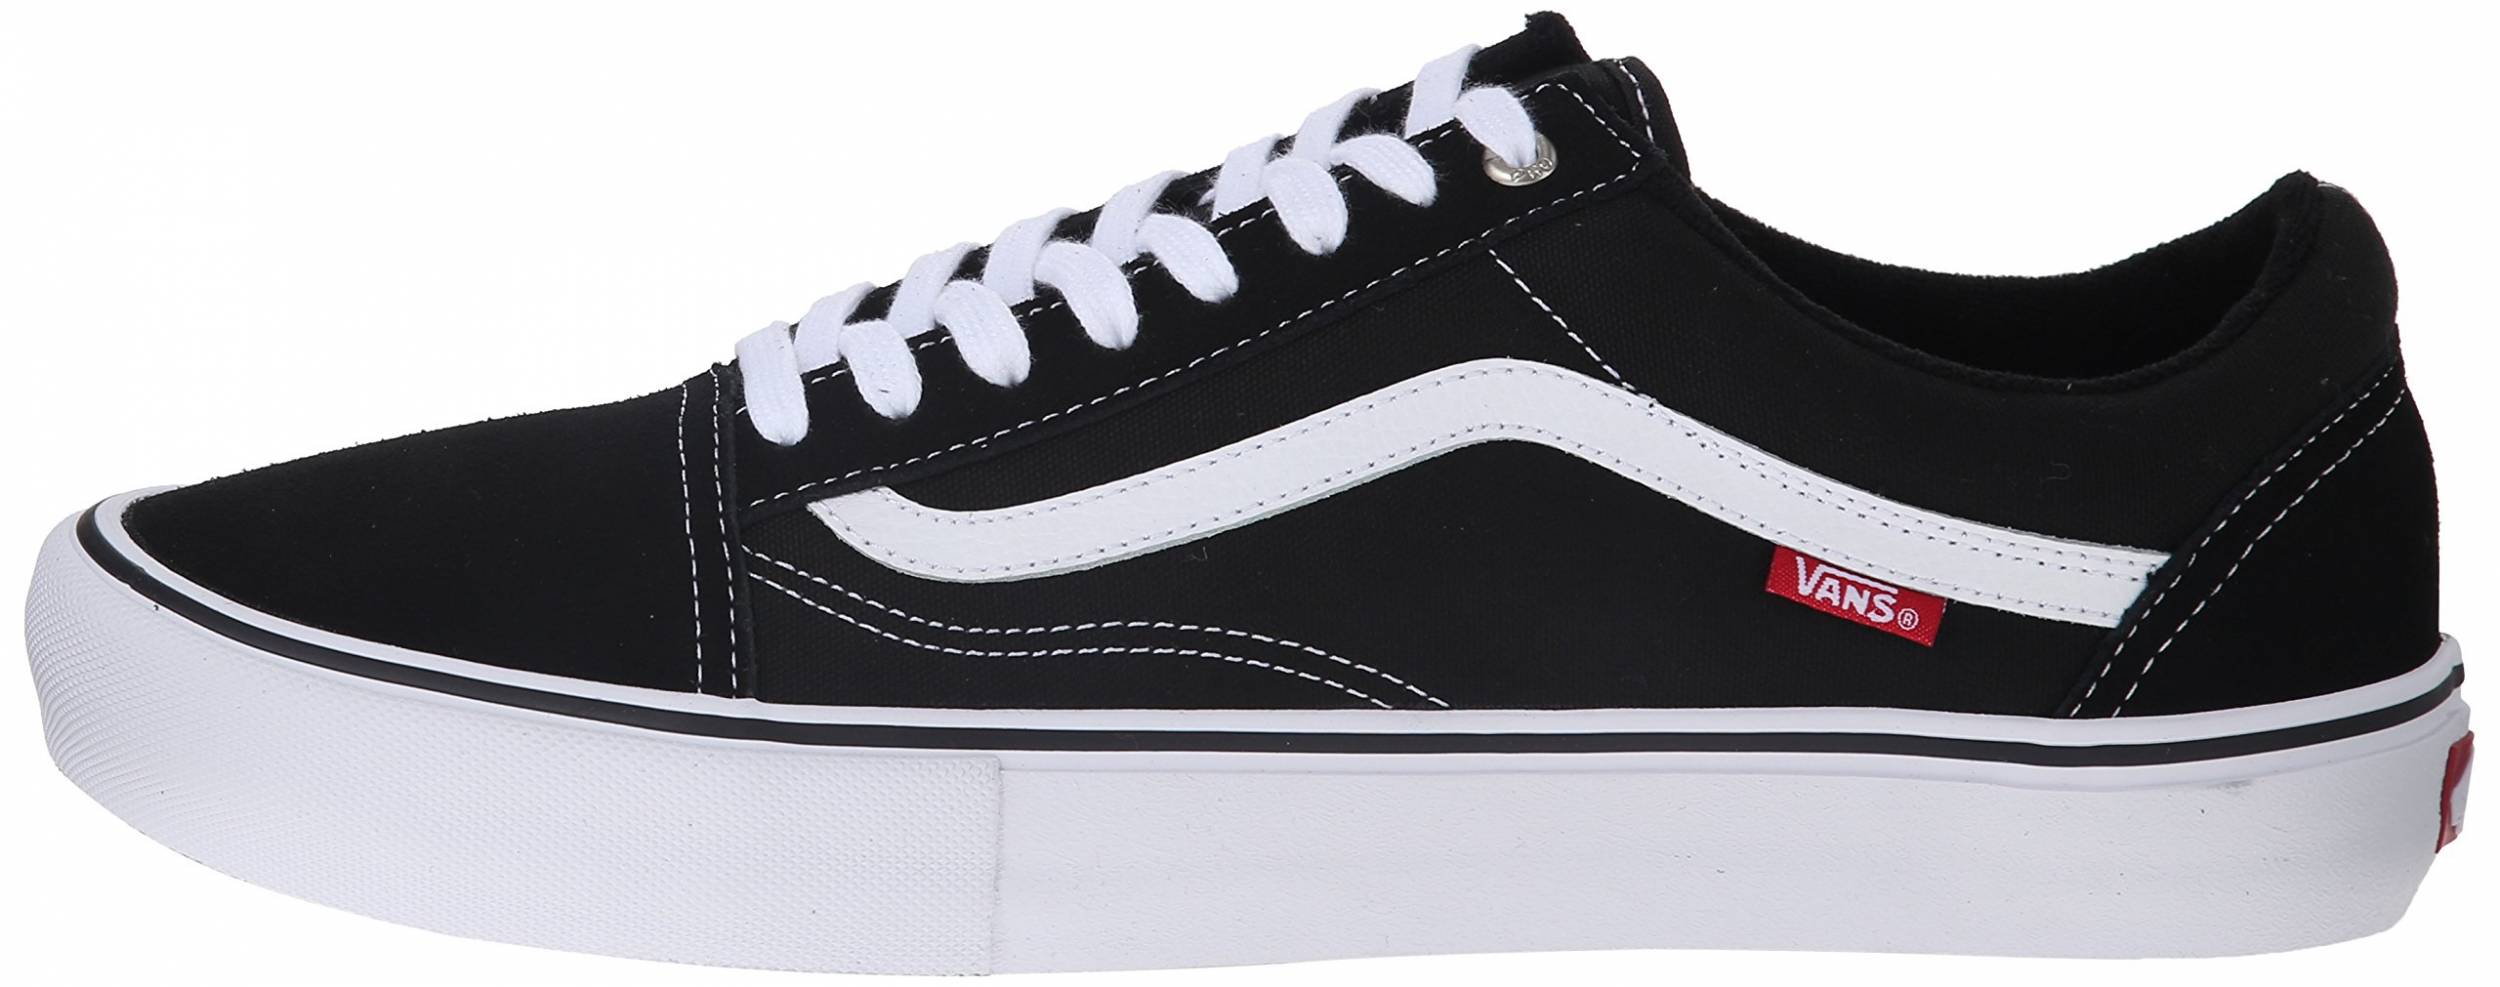 Only $49 + Review of Vans Old Skool Pro 